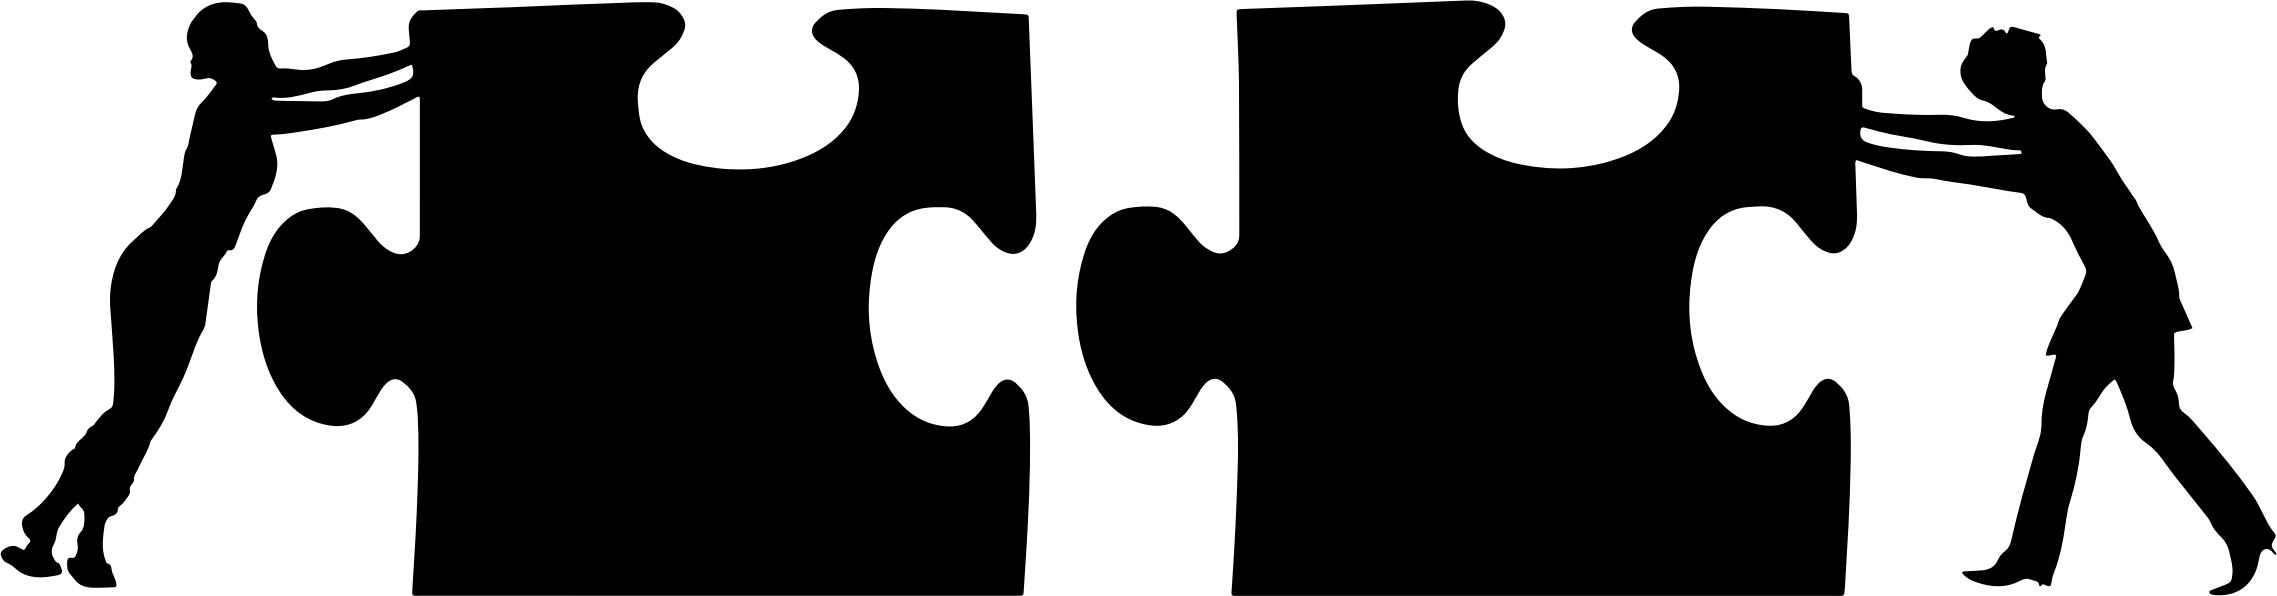 Two Women, Two Puzzle Pieces Silhouette png